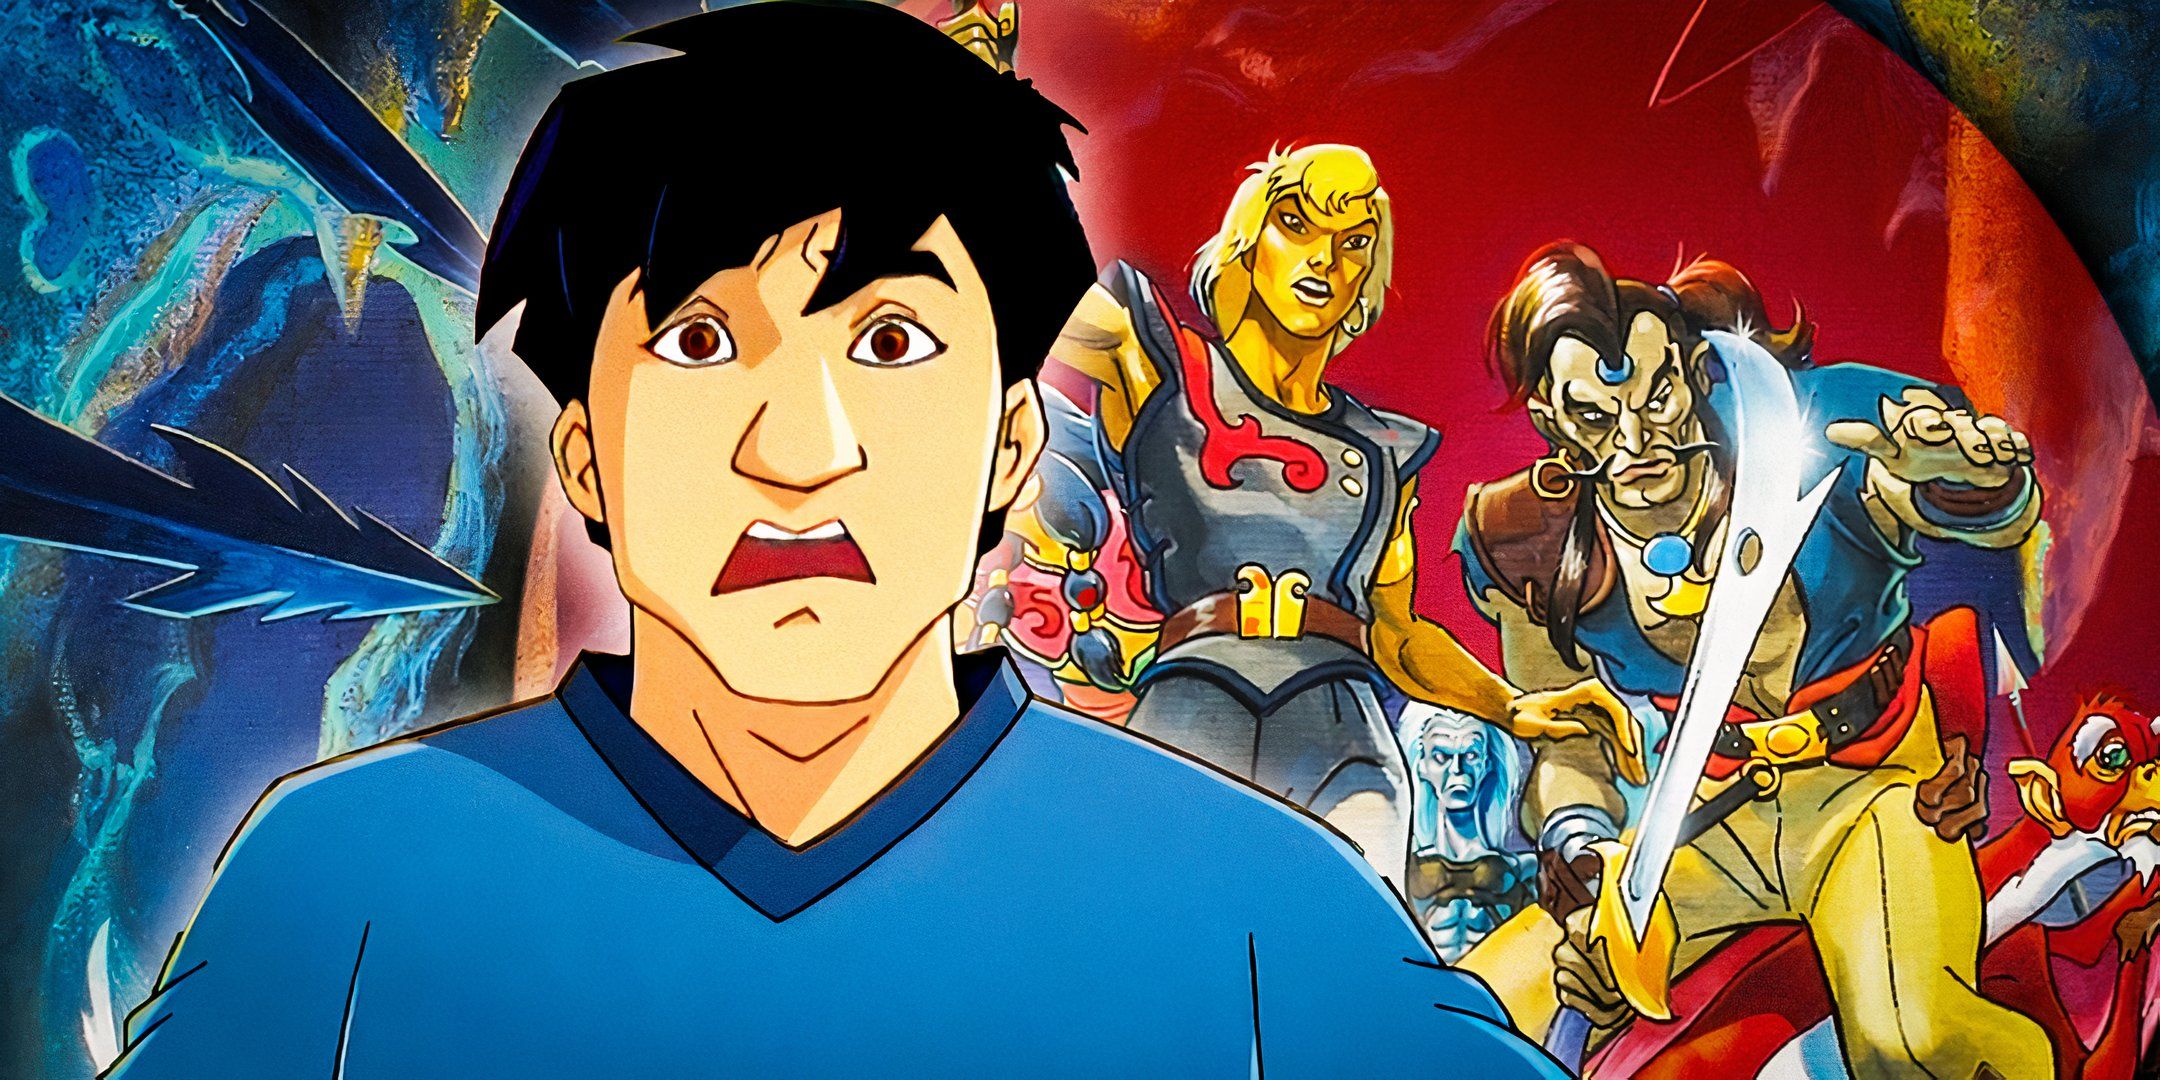 Jackie-Chan-from-Jackie-Chan-Adventures-and-Imagery-from-(The-Pirates-of-Dark-Water)-